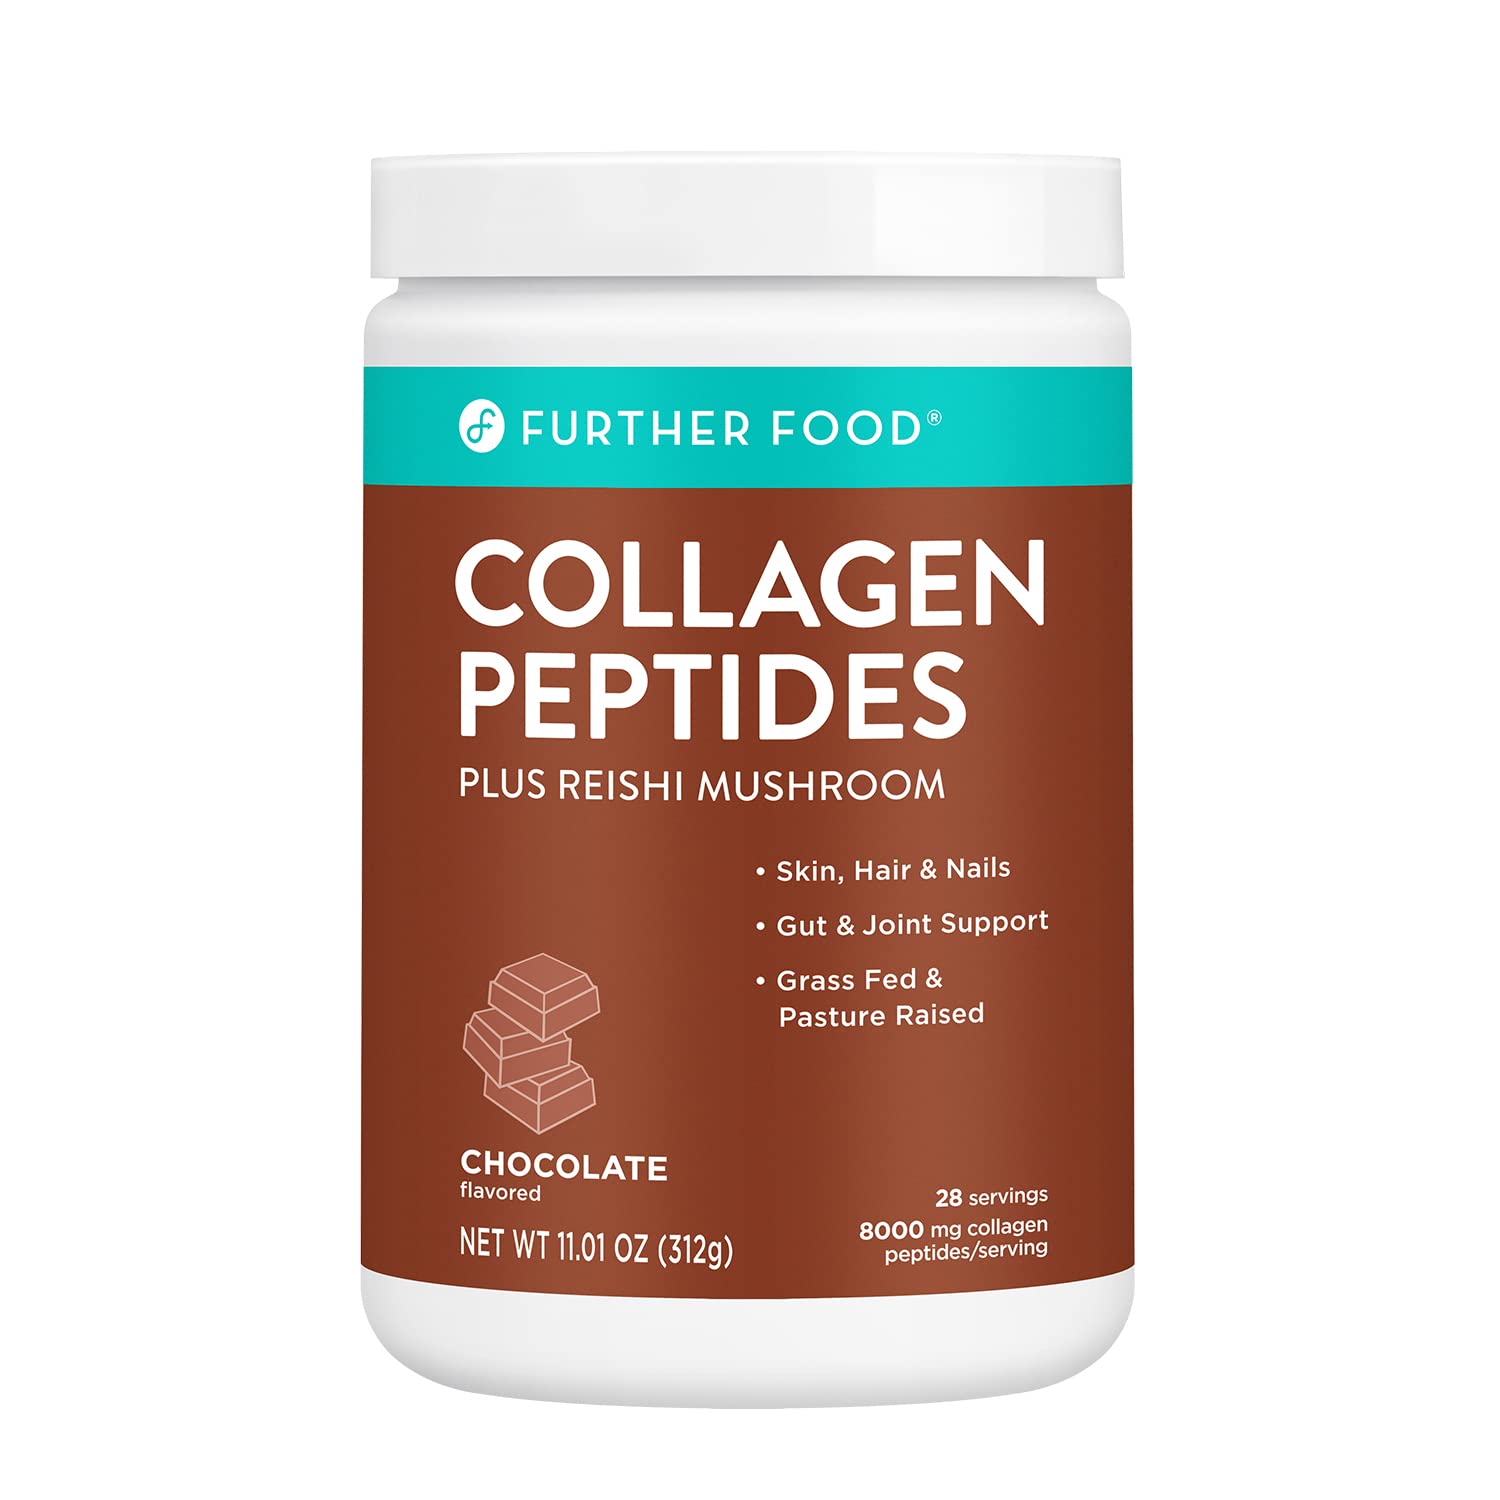 Further Food Chocolate Collagen Peptides Powder, Grass-Fed Pasture-Raised Hydrolyzed Type 1 & 3 Protein, Gut Health + Joint, Hair, Skin, Nails, Paleo Keto Sugar-Free (28 Servings)